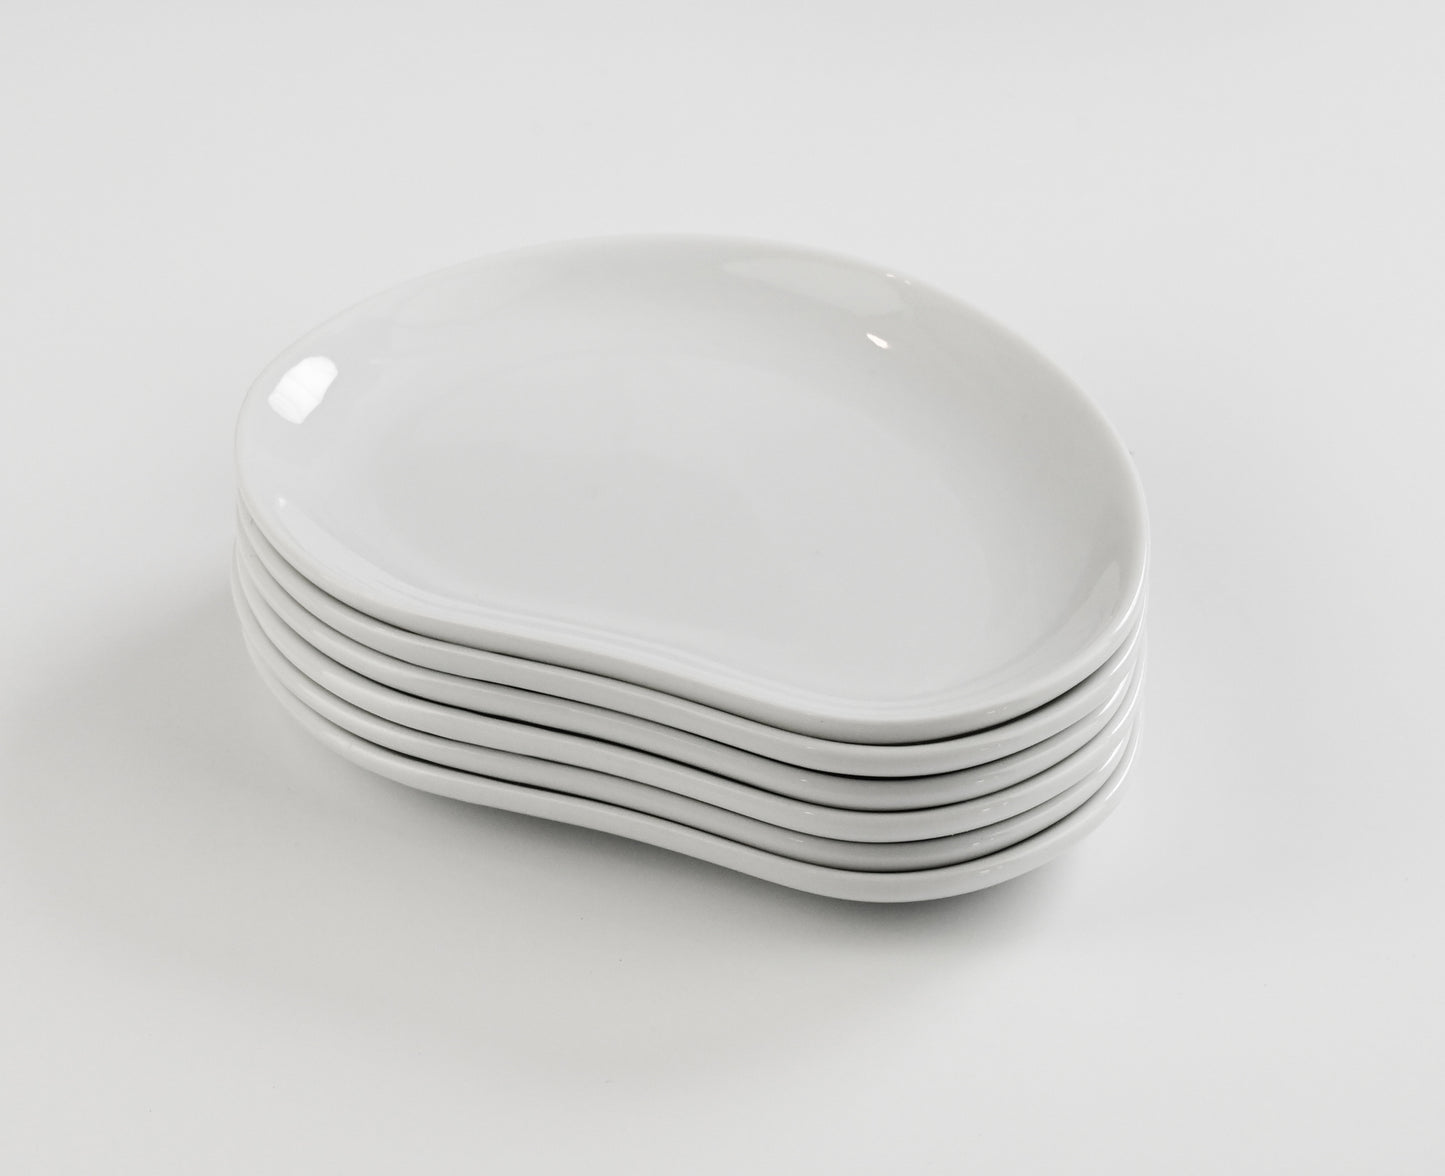 Organic Design Appetizer Plates - Set of 6 - Orion's Table 